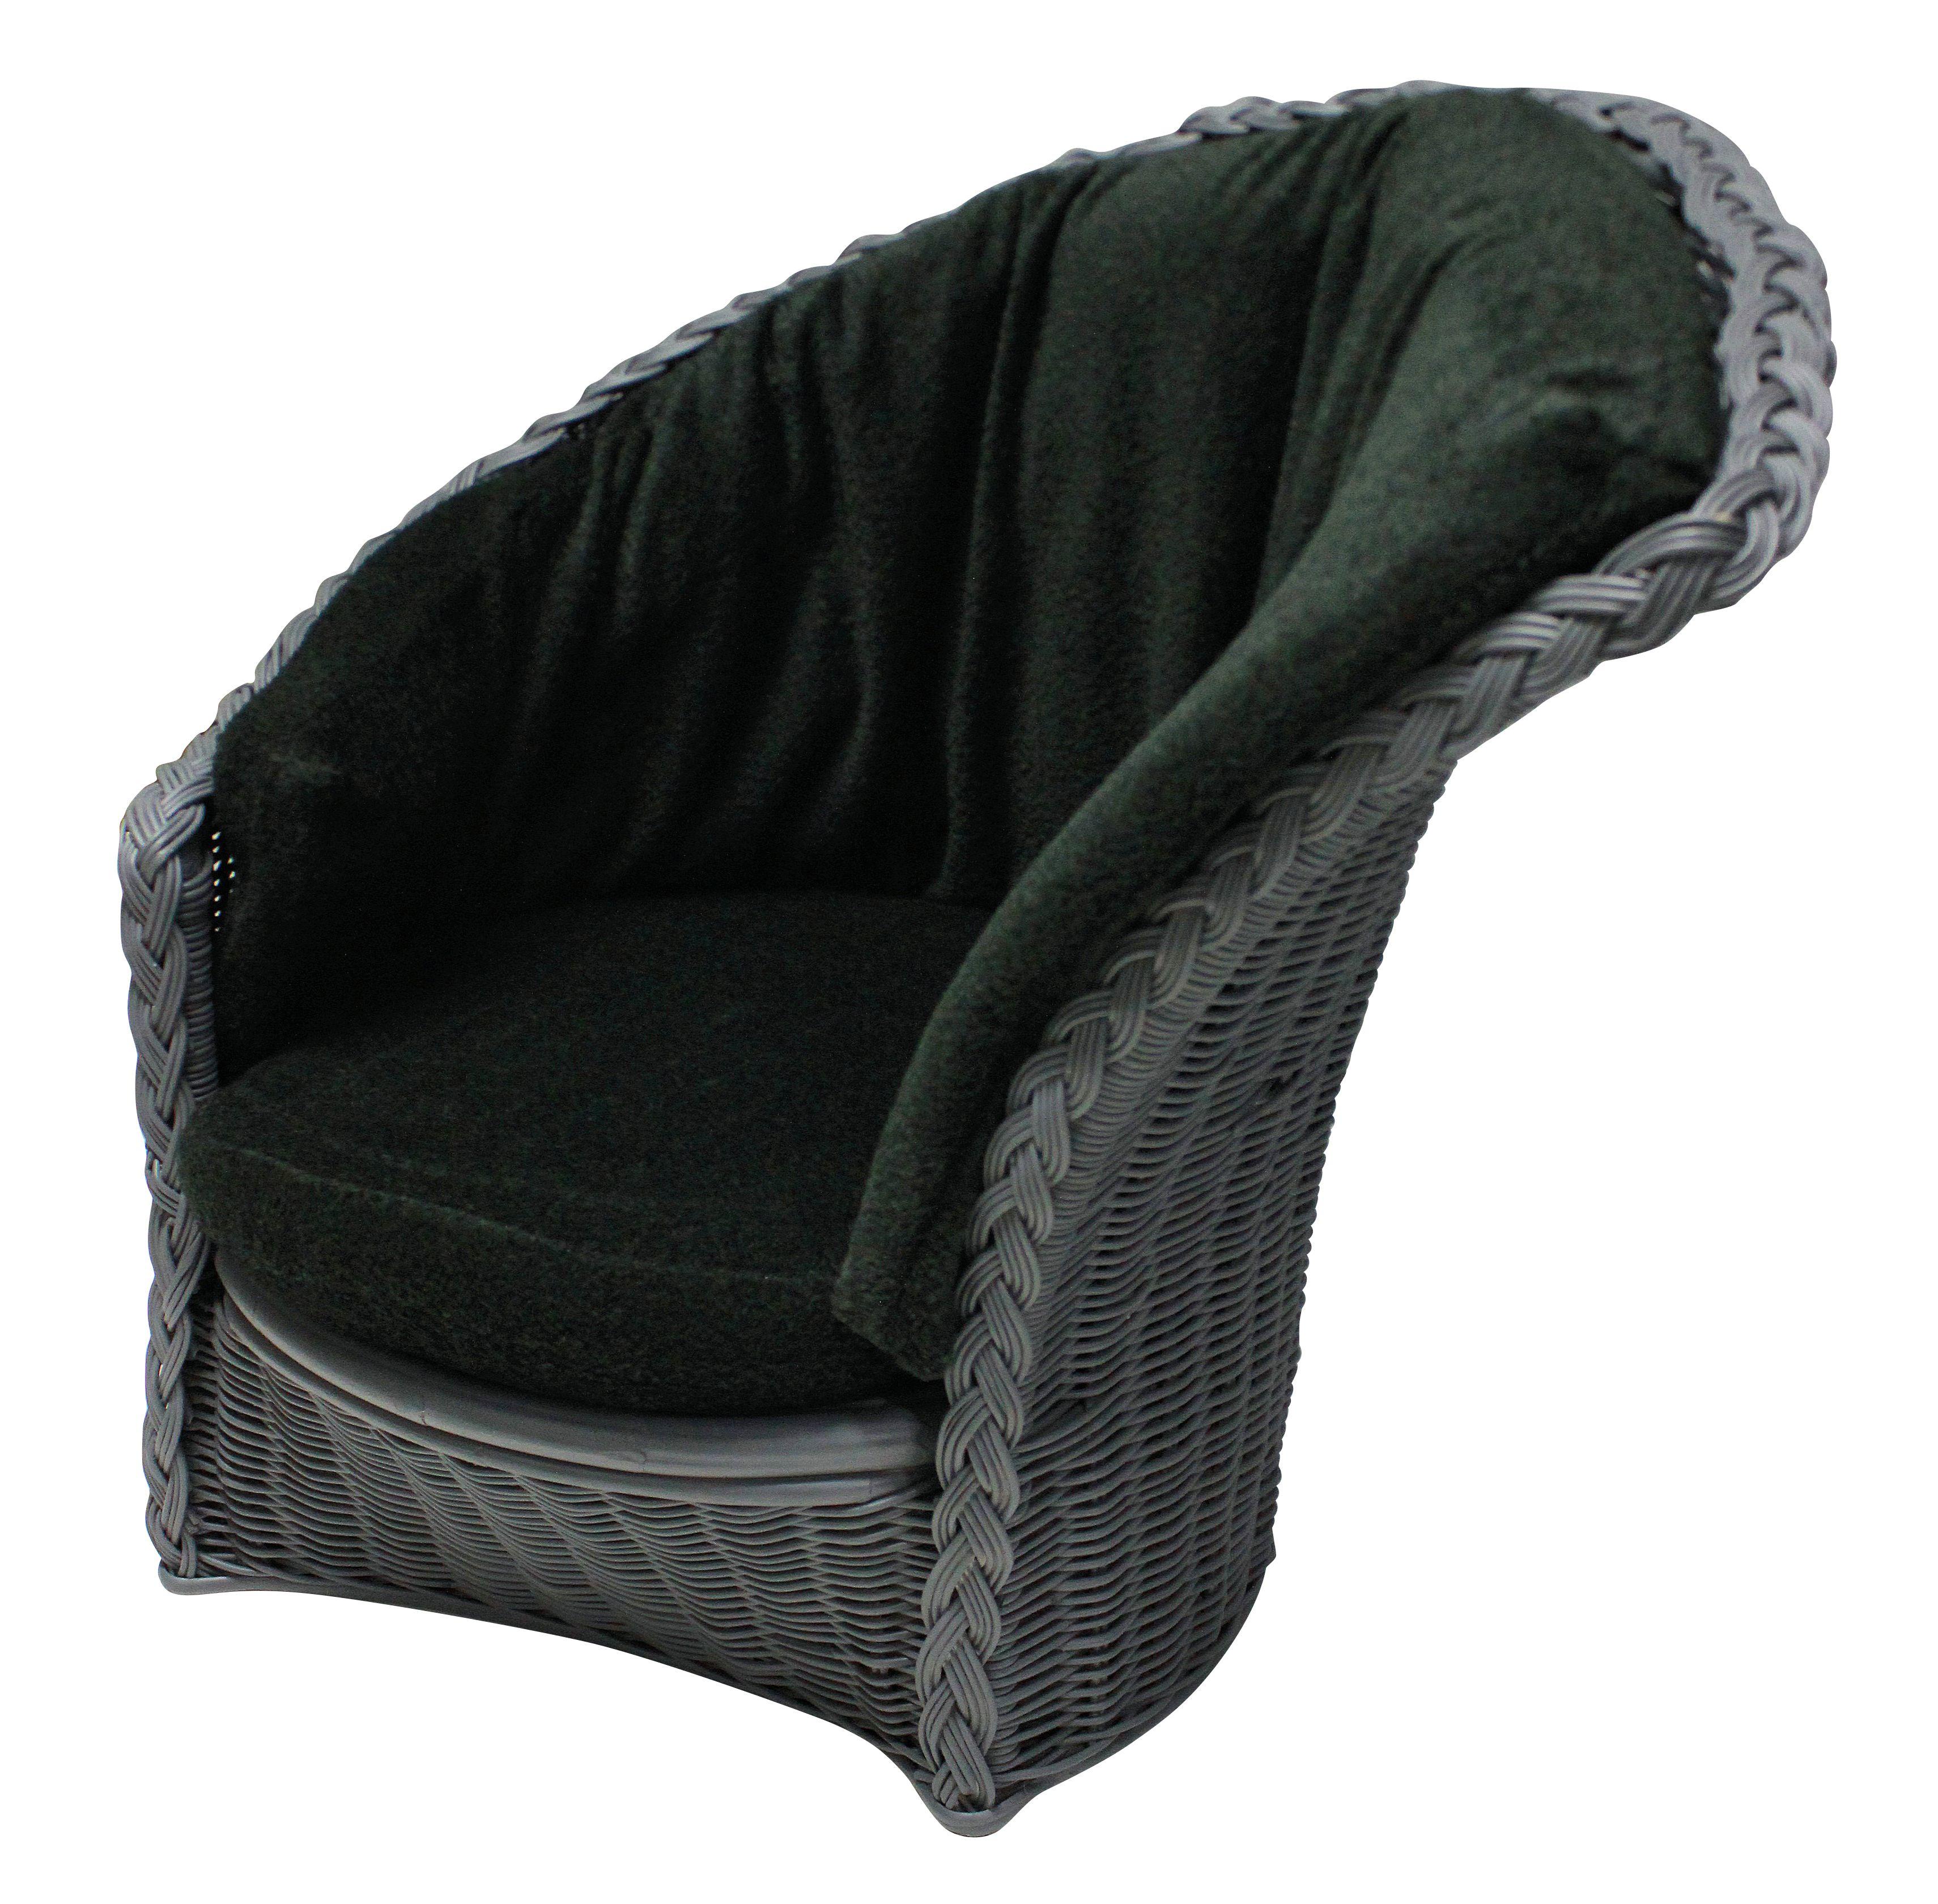 A pair of Italian lounge chairs of good comfortable scale, in grey rattan with mohair cushions in dark green.